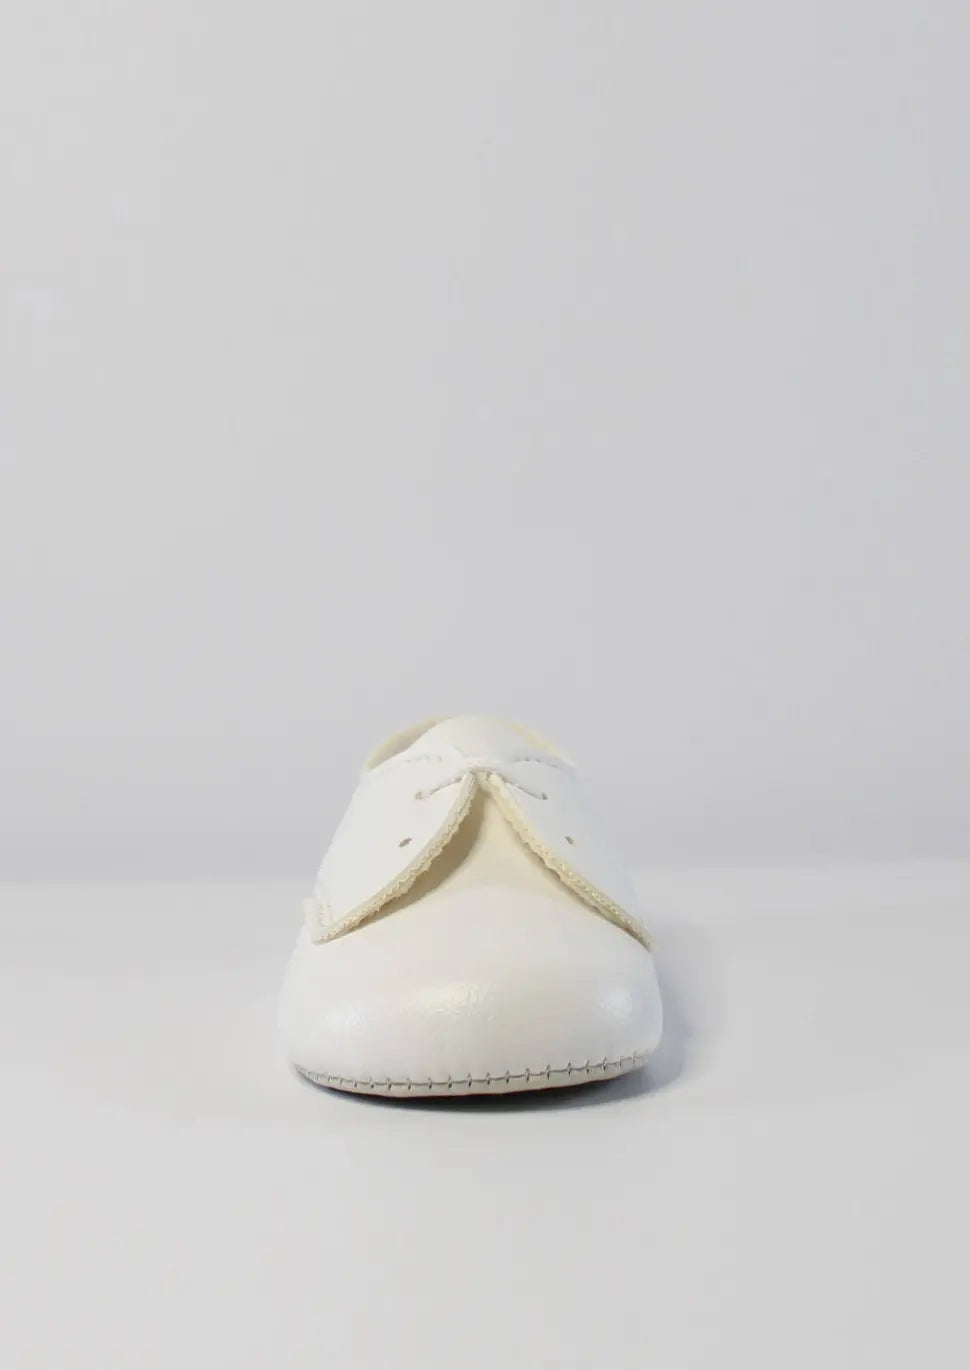 Boys White Laced shoes by Baypods from tors childrens wear